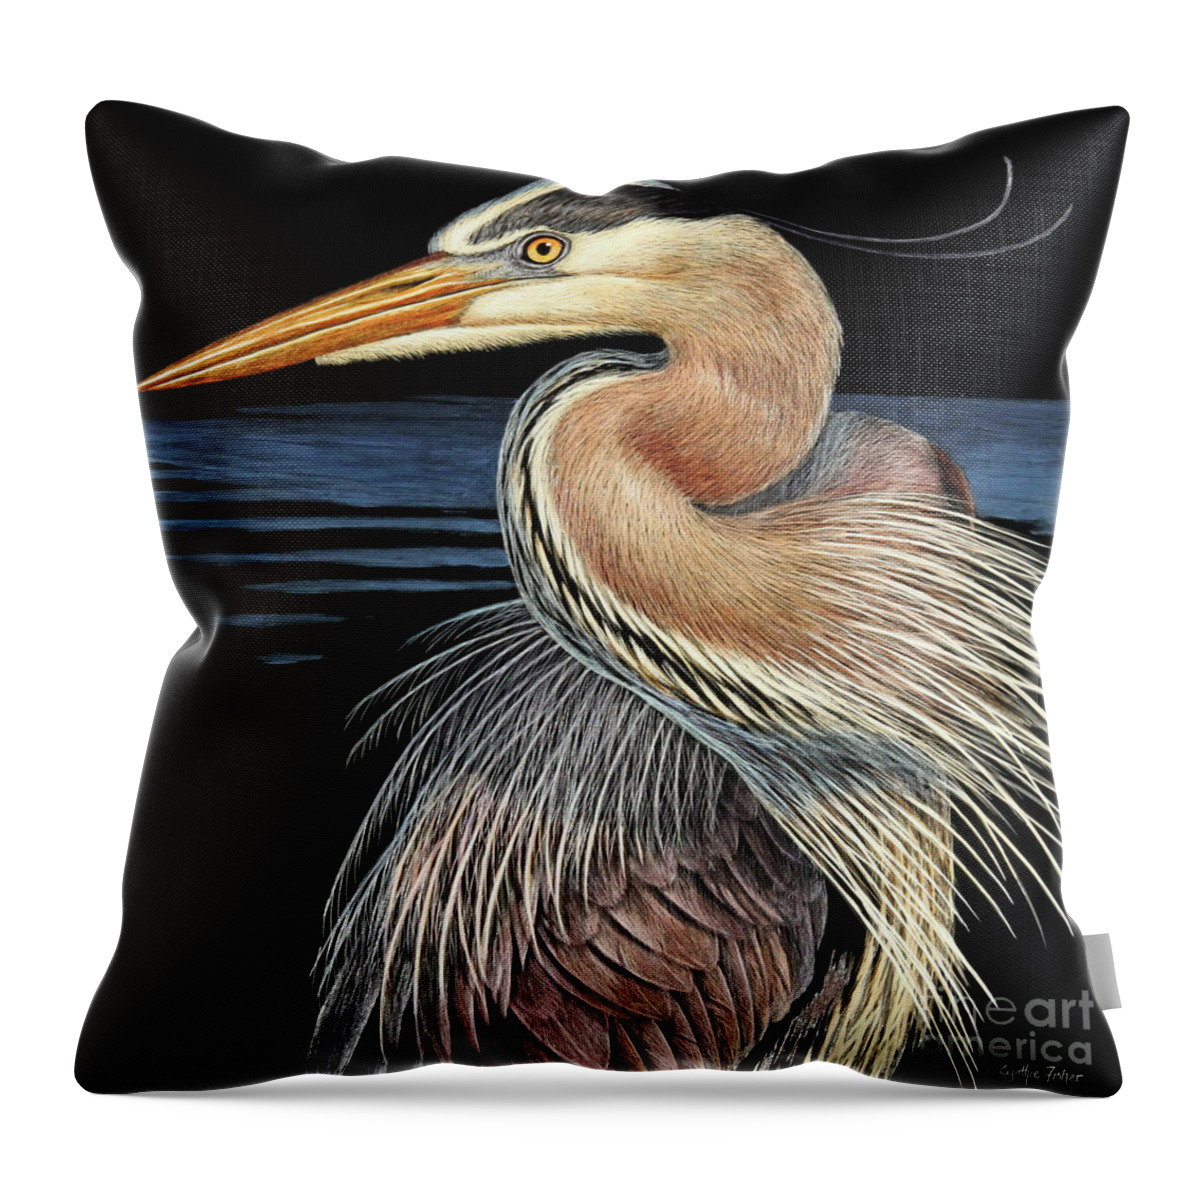 Cynthie Fisher Throw Pillow featuring the drawing Great Blue Heron by Cynthie Fisher